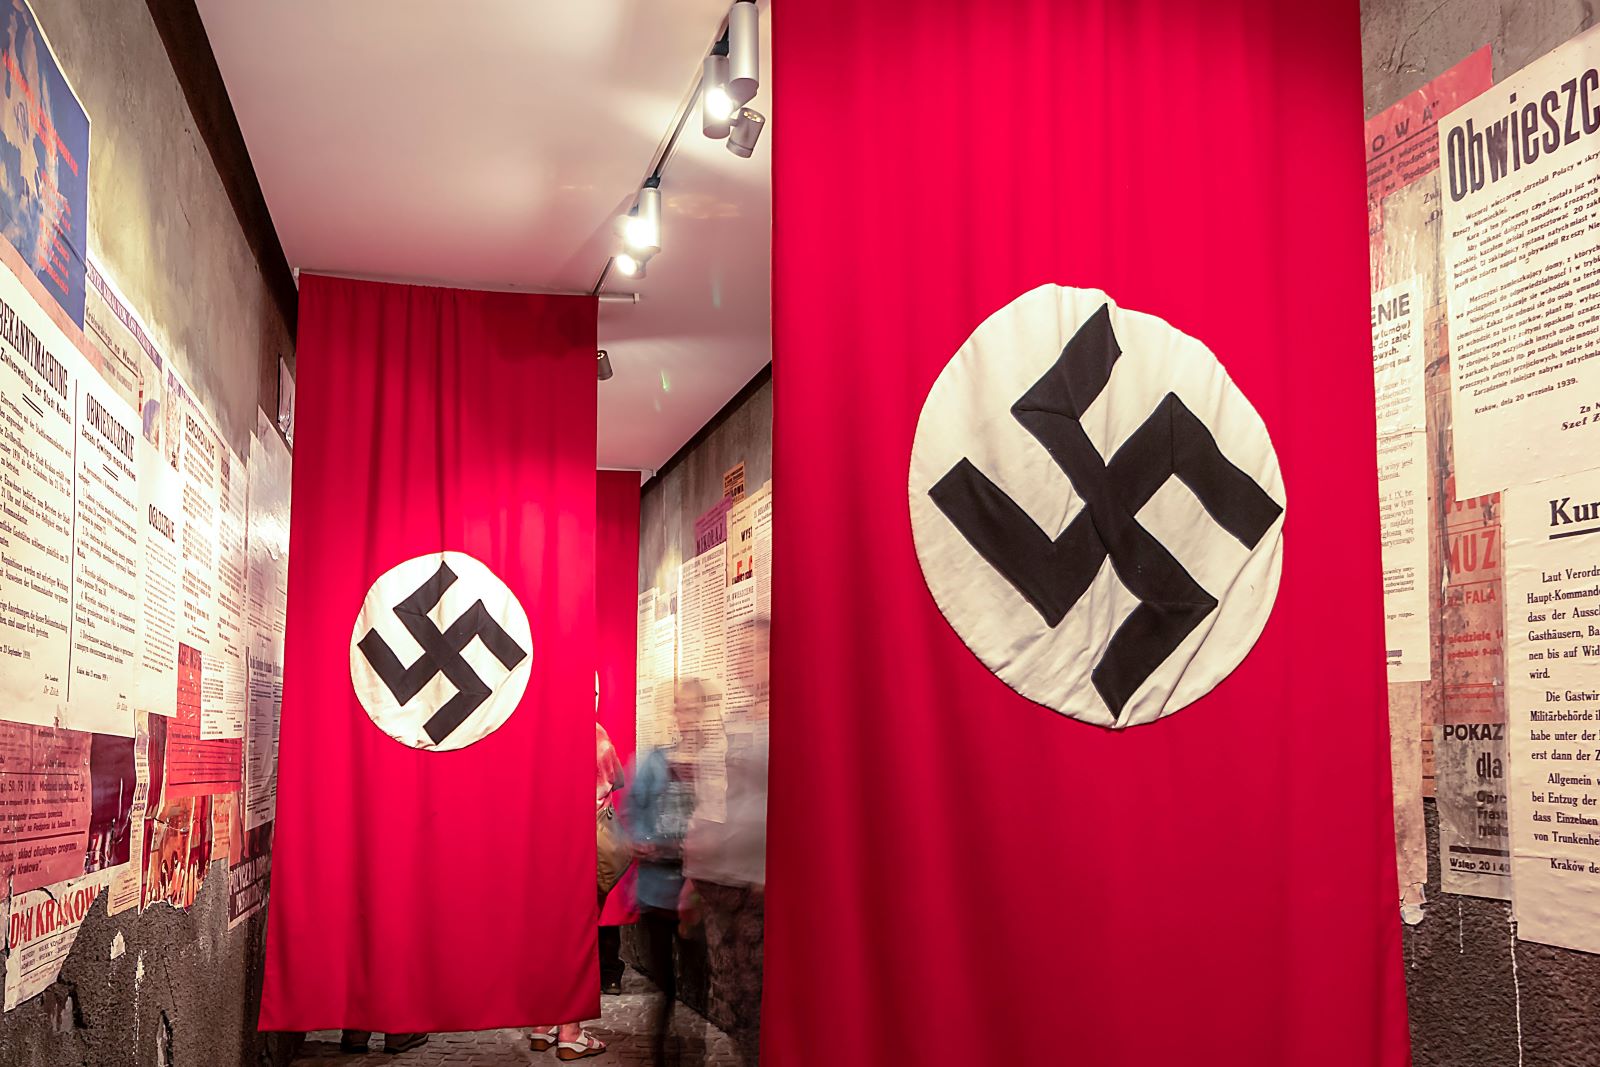 Image Credit: Shutterstock / agsaz <p>Linked to the early Nazi Party, the Thule Society was steeped in racist and occult beliefs. It played a crucial role in the political upheaval post-World War I Germany.</p>